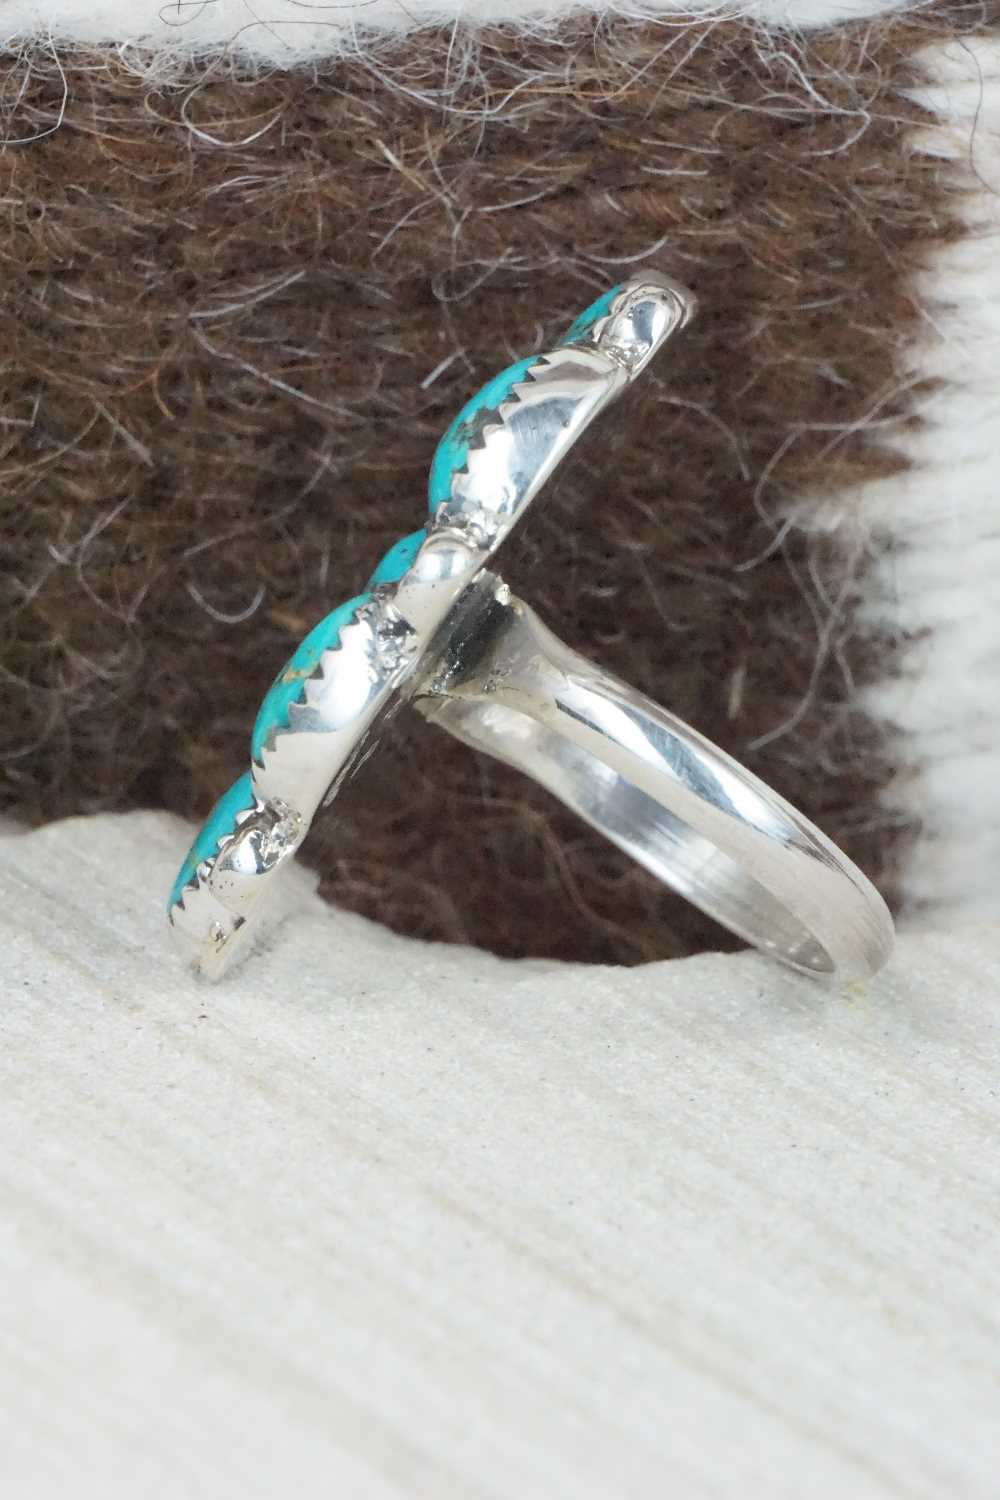 Turquoise & Sterling Silver Ring - Priscilla Reeder - Size 9.25